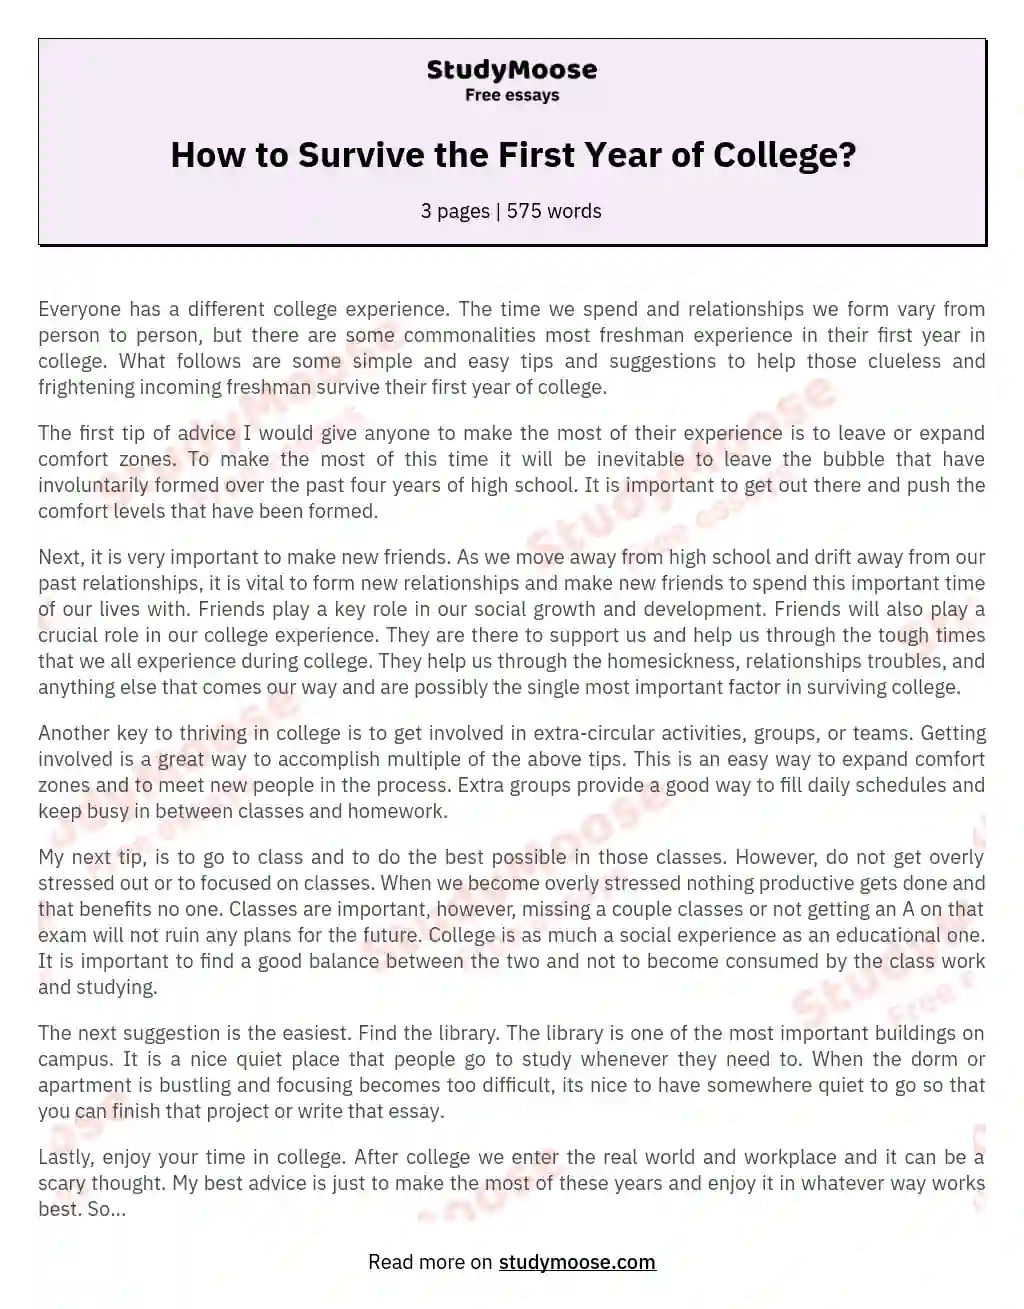 How to Survive the First Year of College?